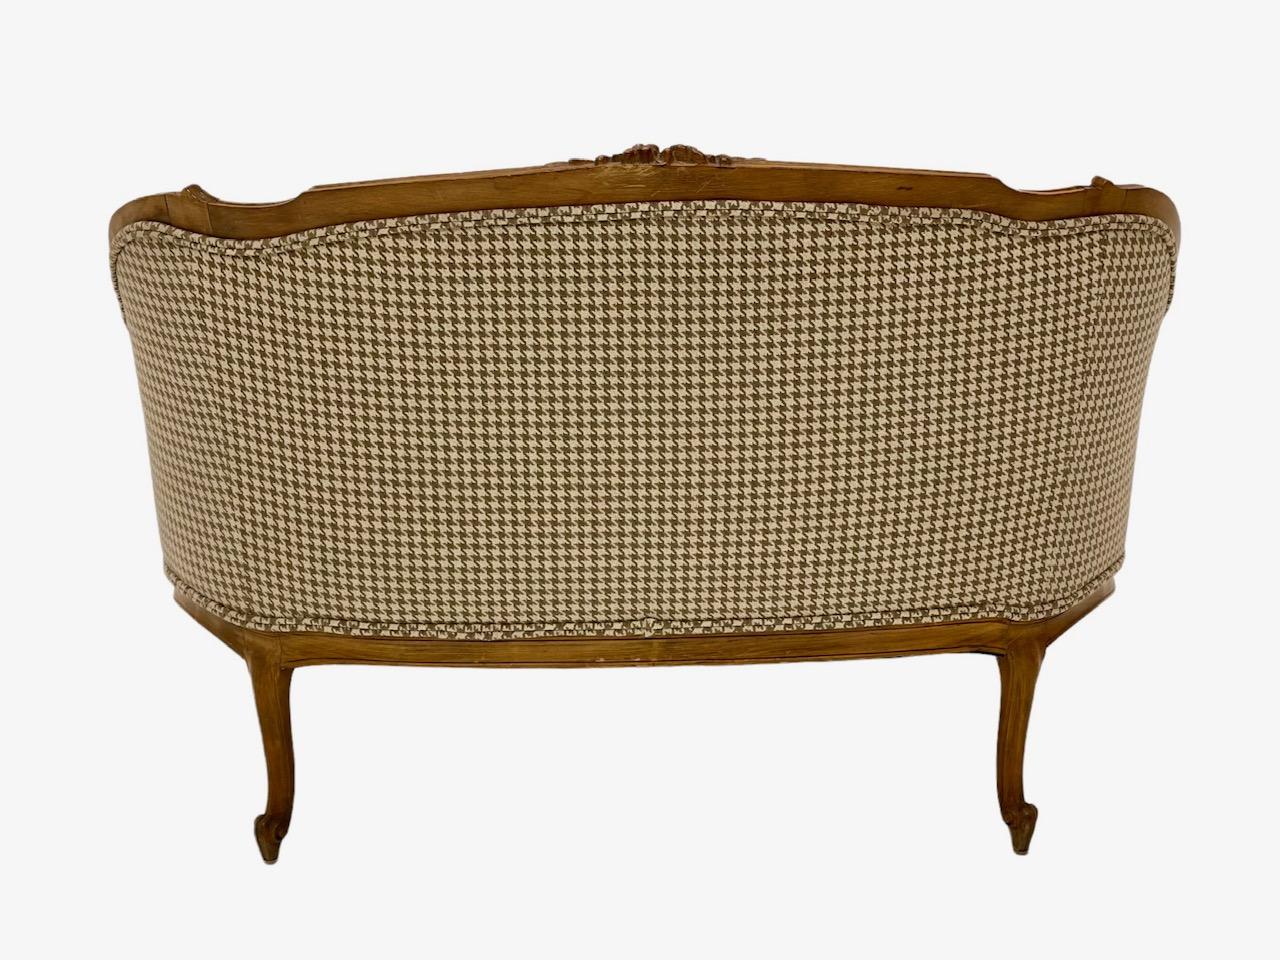 American French Provincial Settee in Houndstooth Pattern Fabric